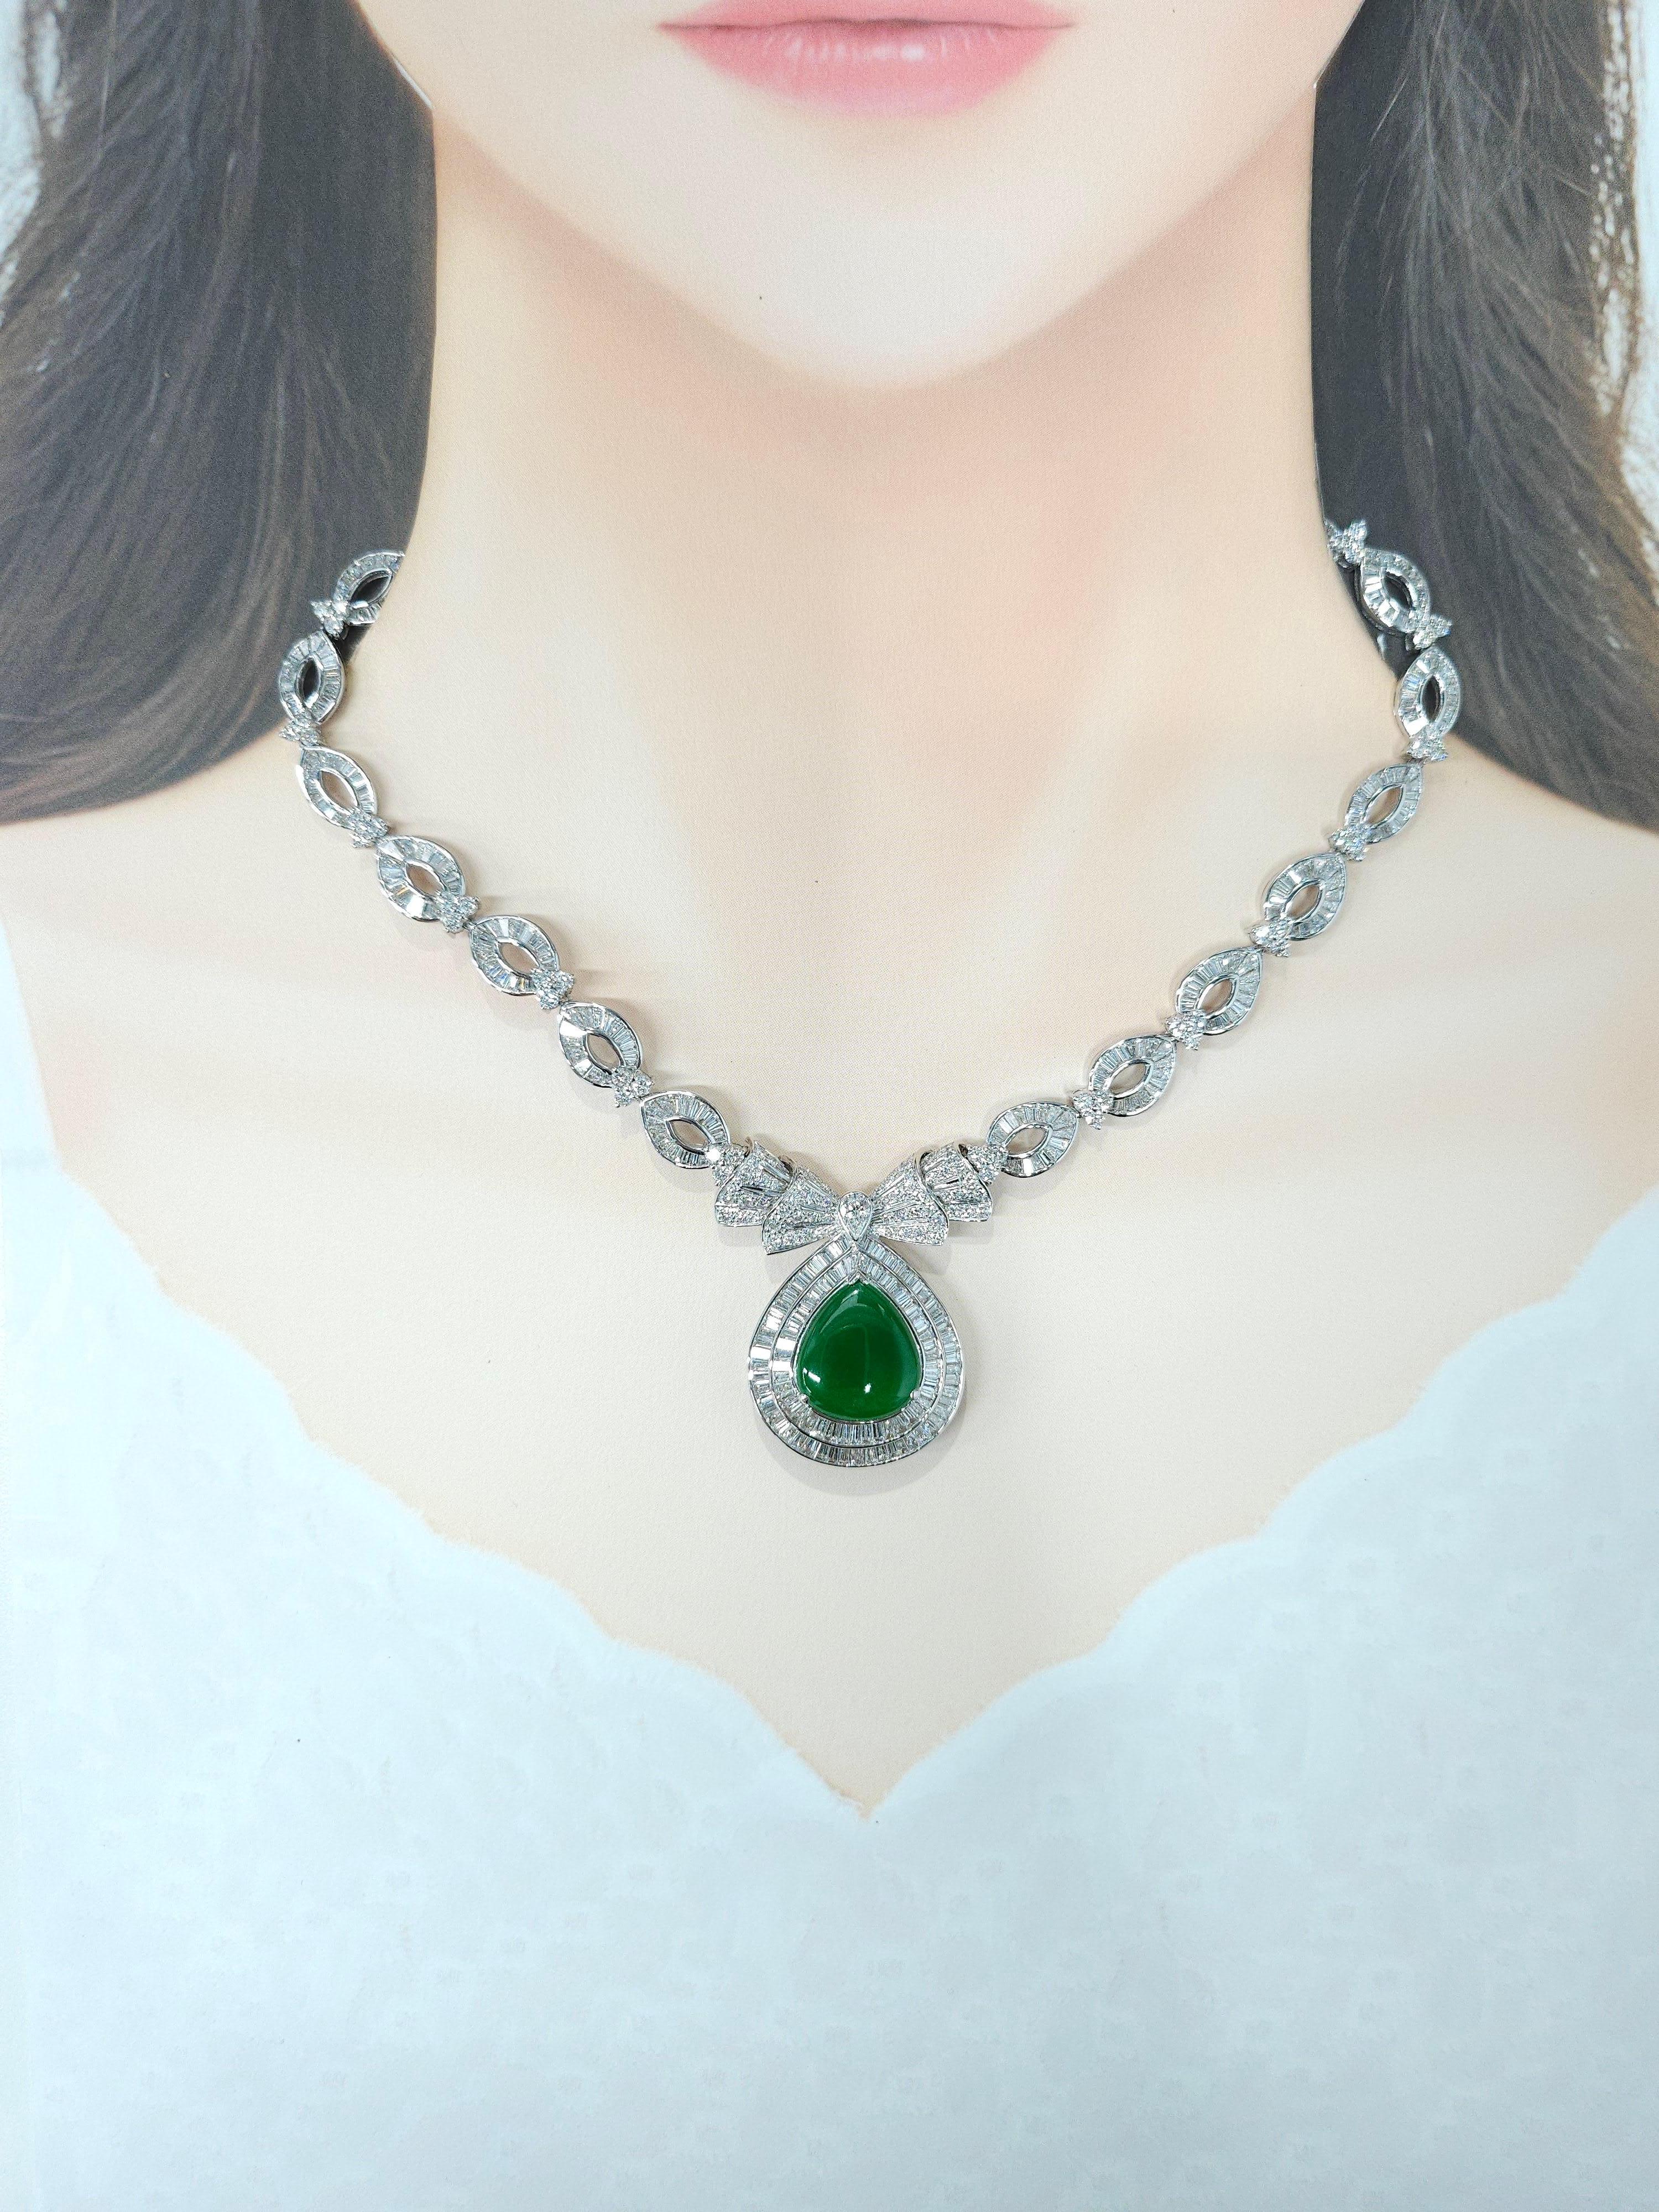 Modern Certified Untreated Jadite Jade and 18Ct Diamond Necklace Brooch 18K White Gold For Sale